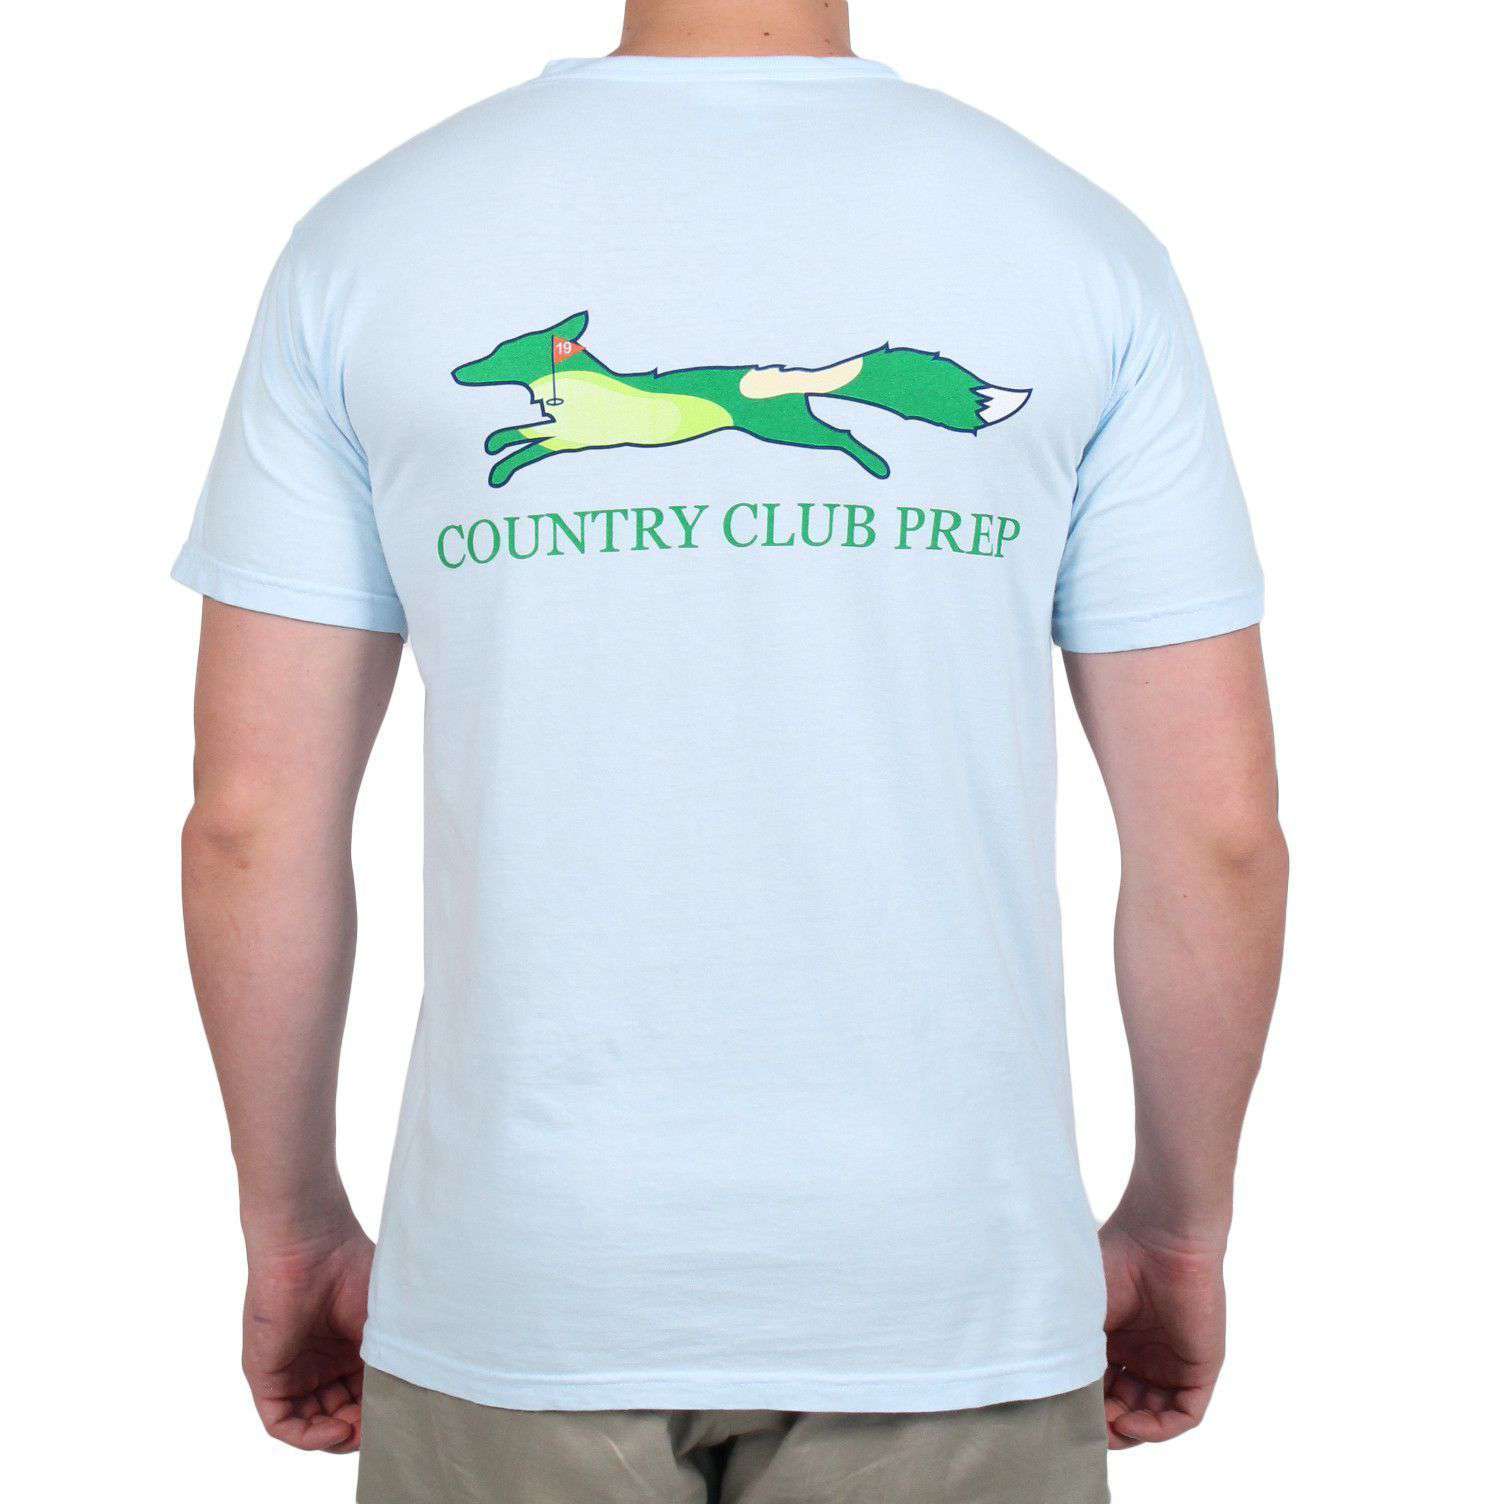 19th Hole Longshanks Logo Tee Shirt in Chambray Blue by Country Club Prep - Country Club Prep